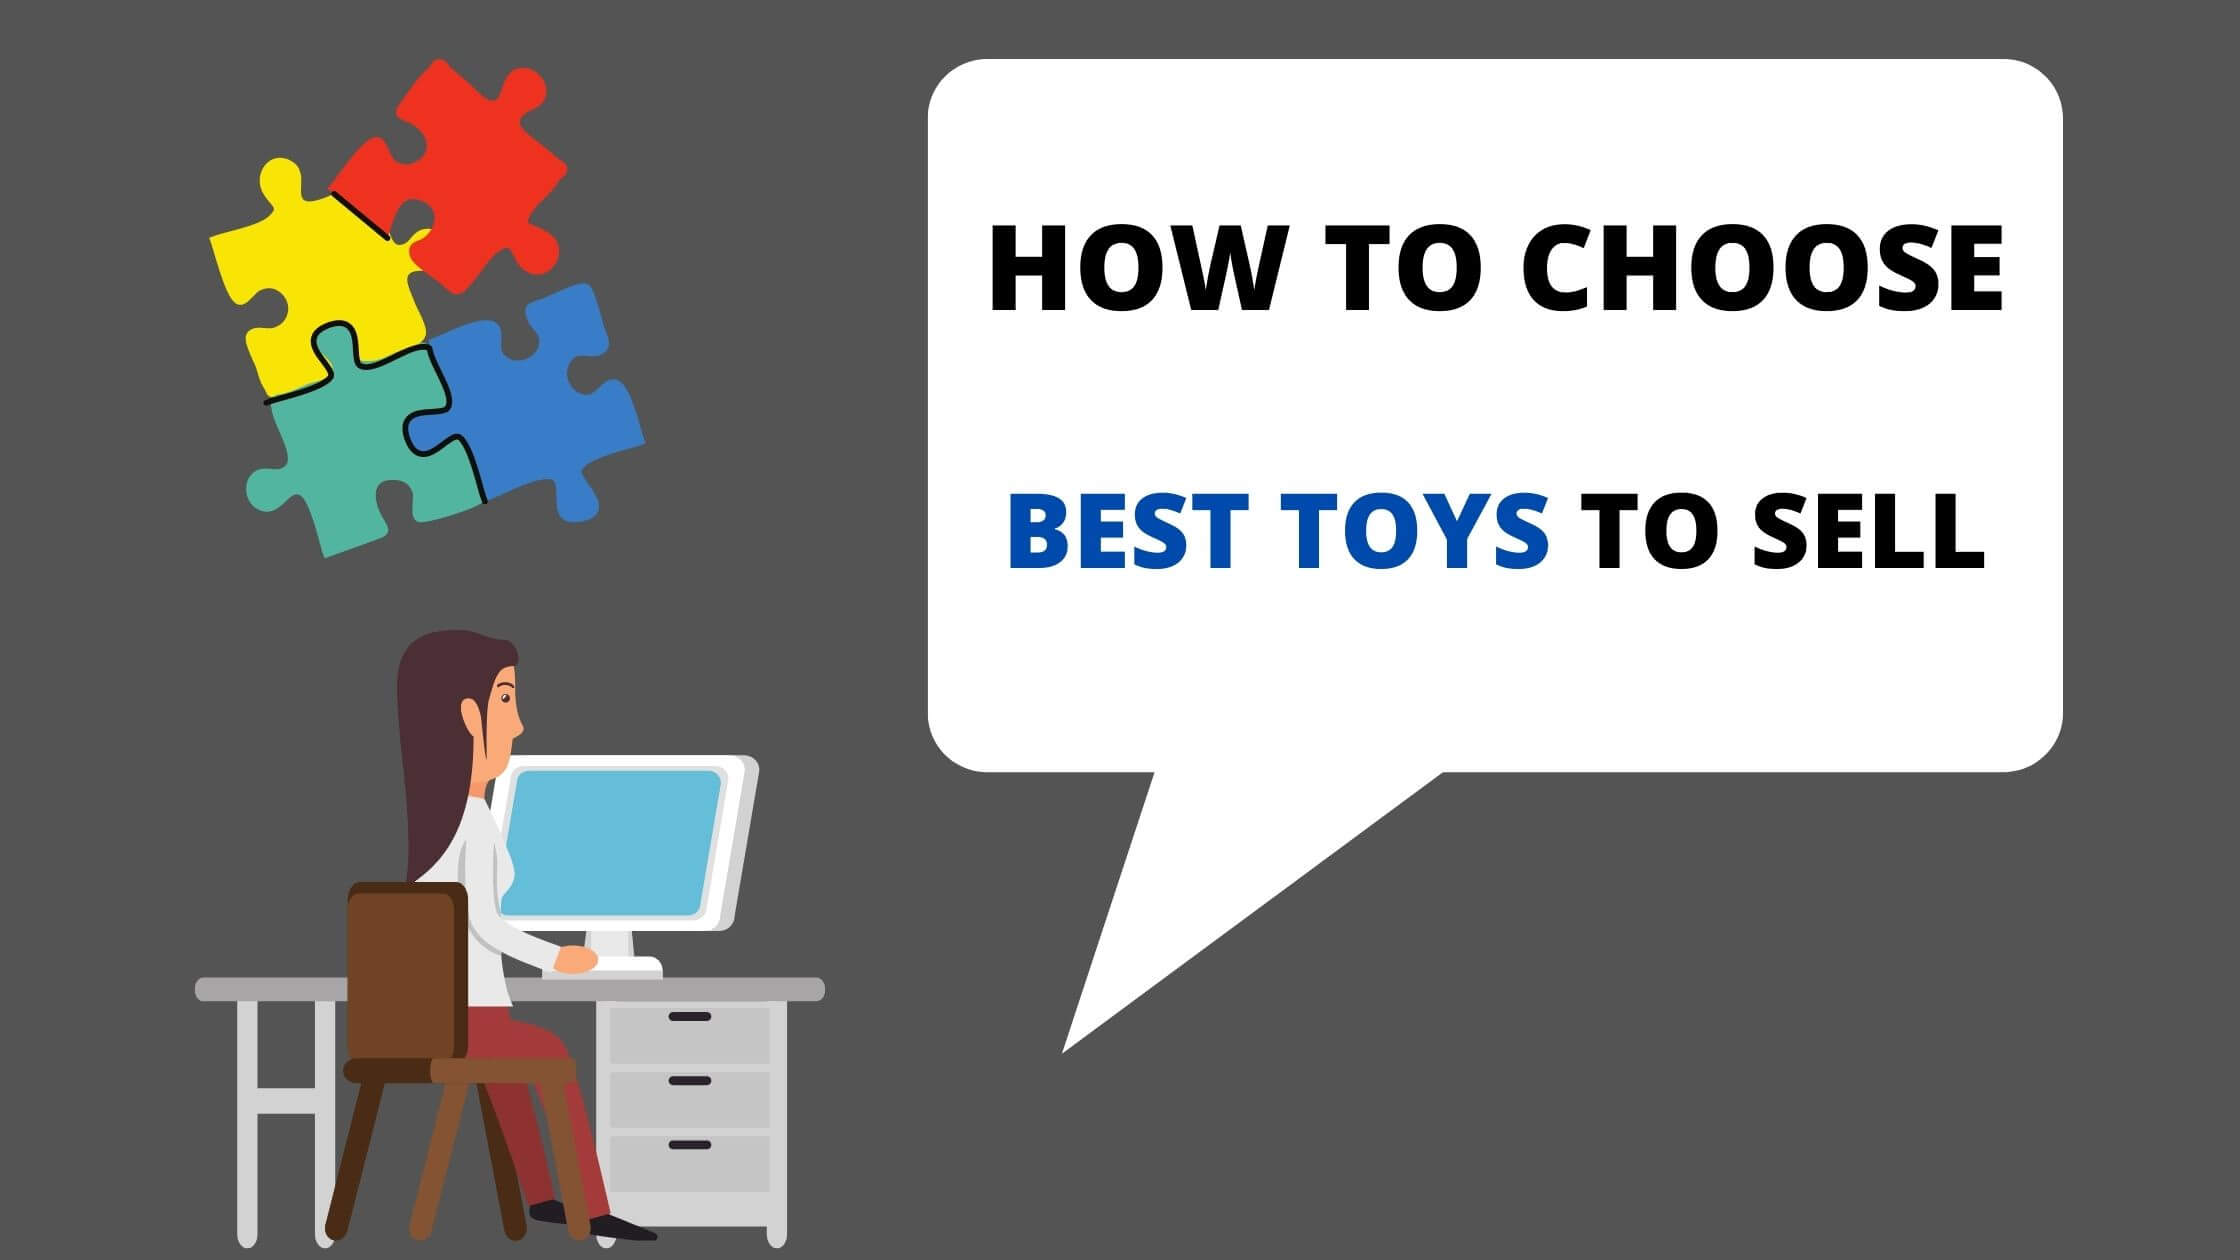 HOW TO CHOOSE BEST TOYS